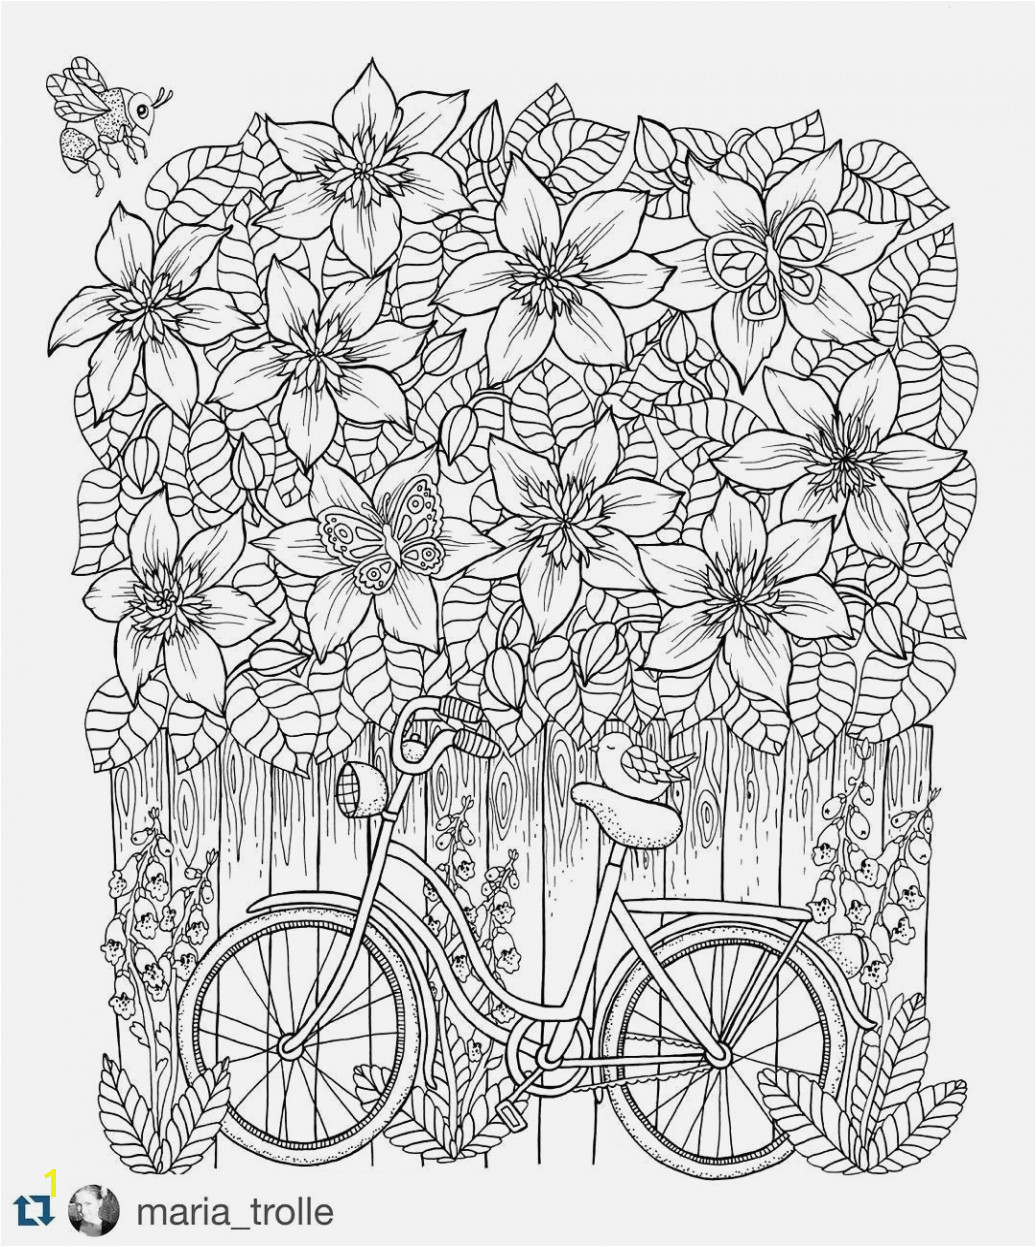 Coloring Pages Of Cloud Cloud Coloring Page Parrot Coloring Pages Free Coloring Pages